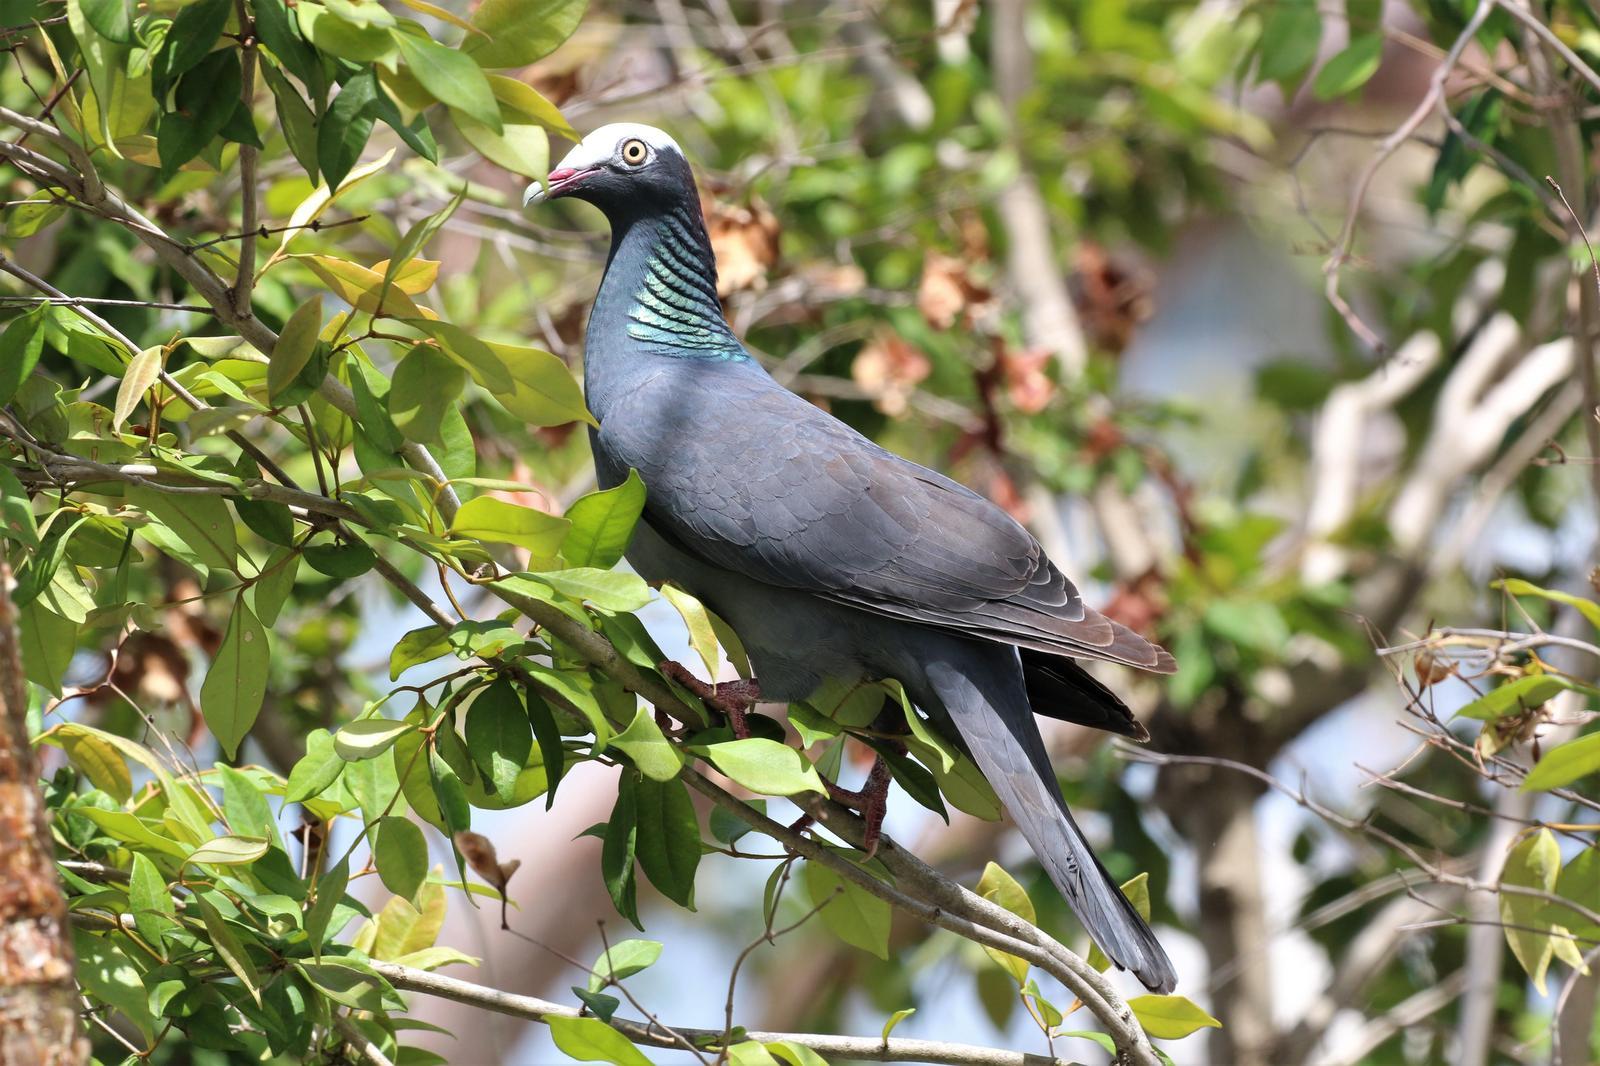 White-crowned Pigeon Photo by Richard Jeffers